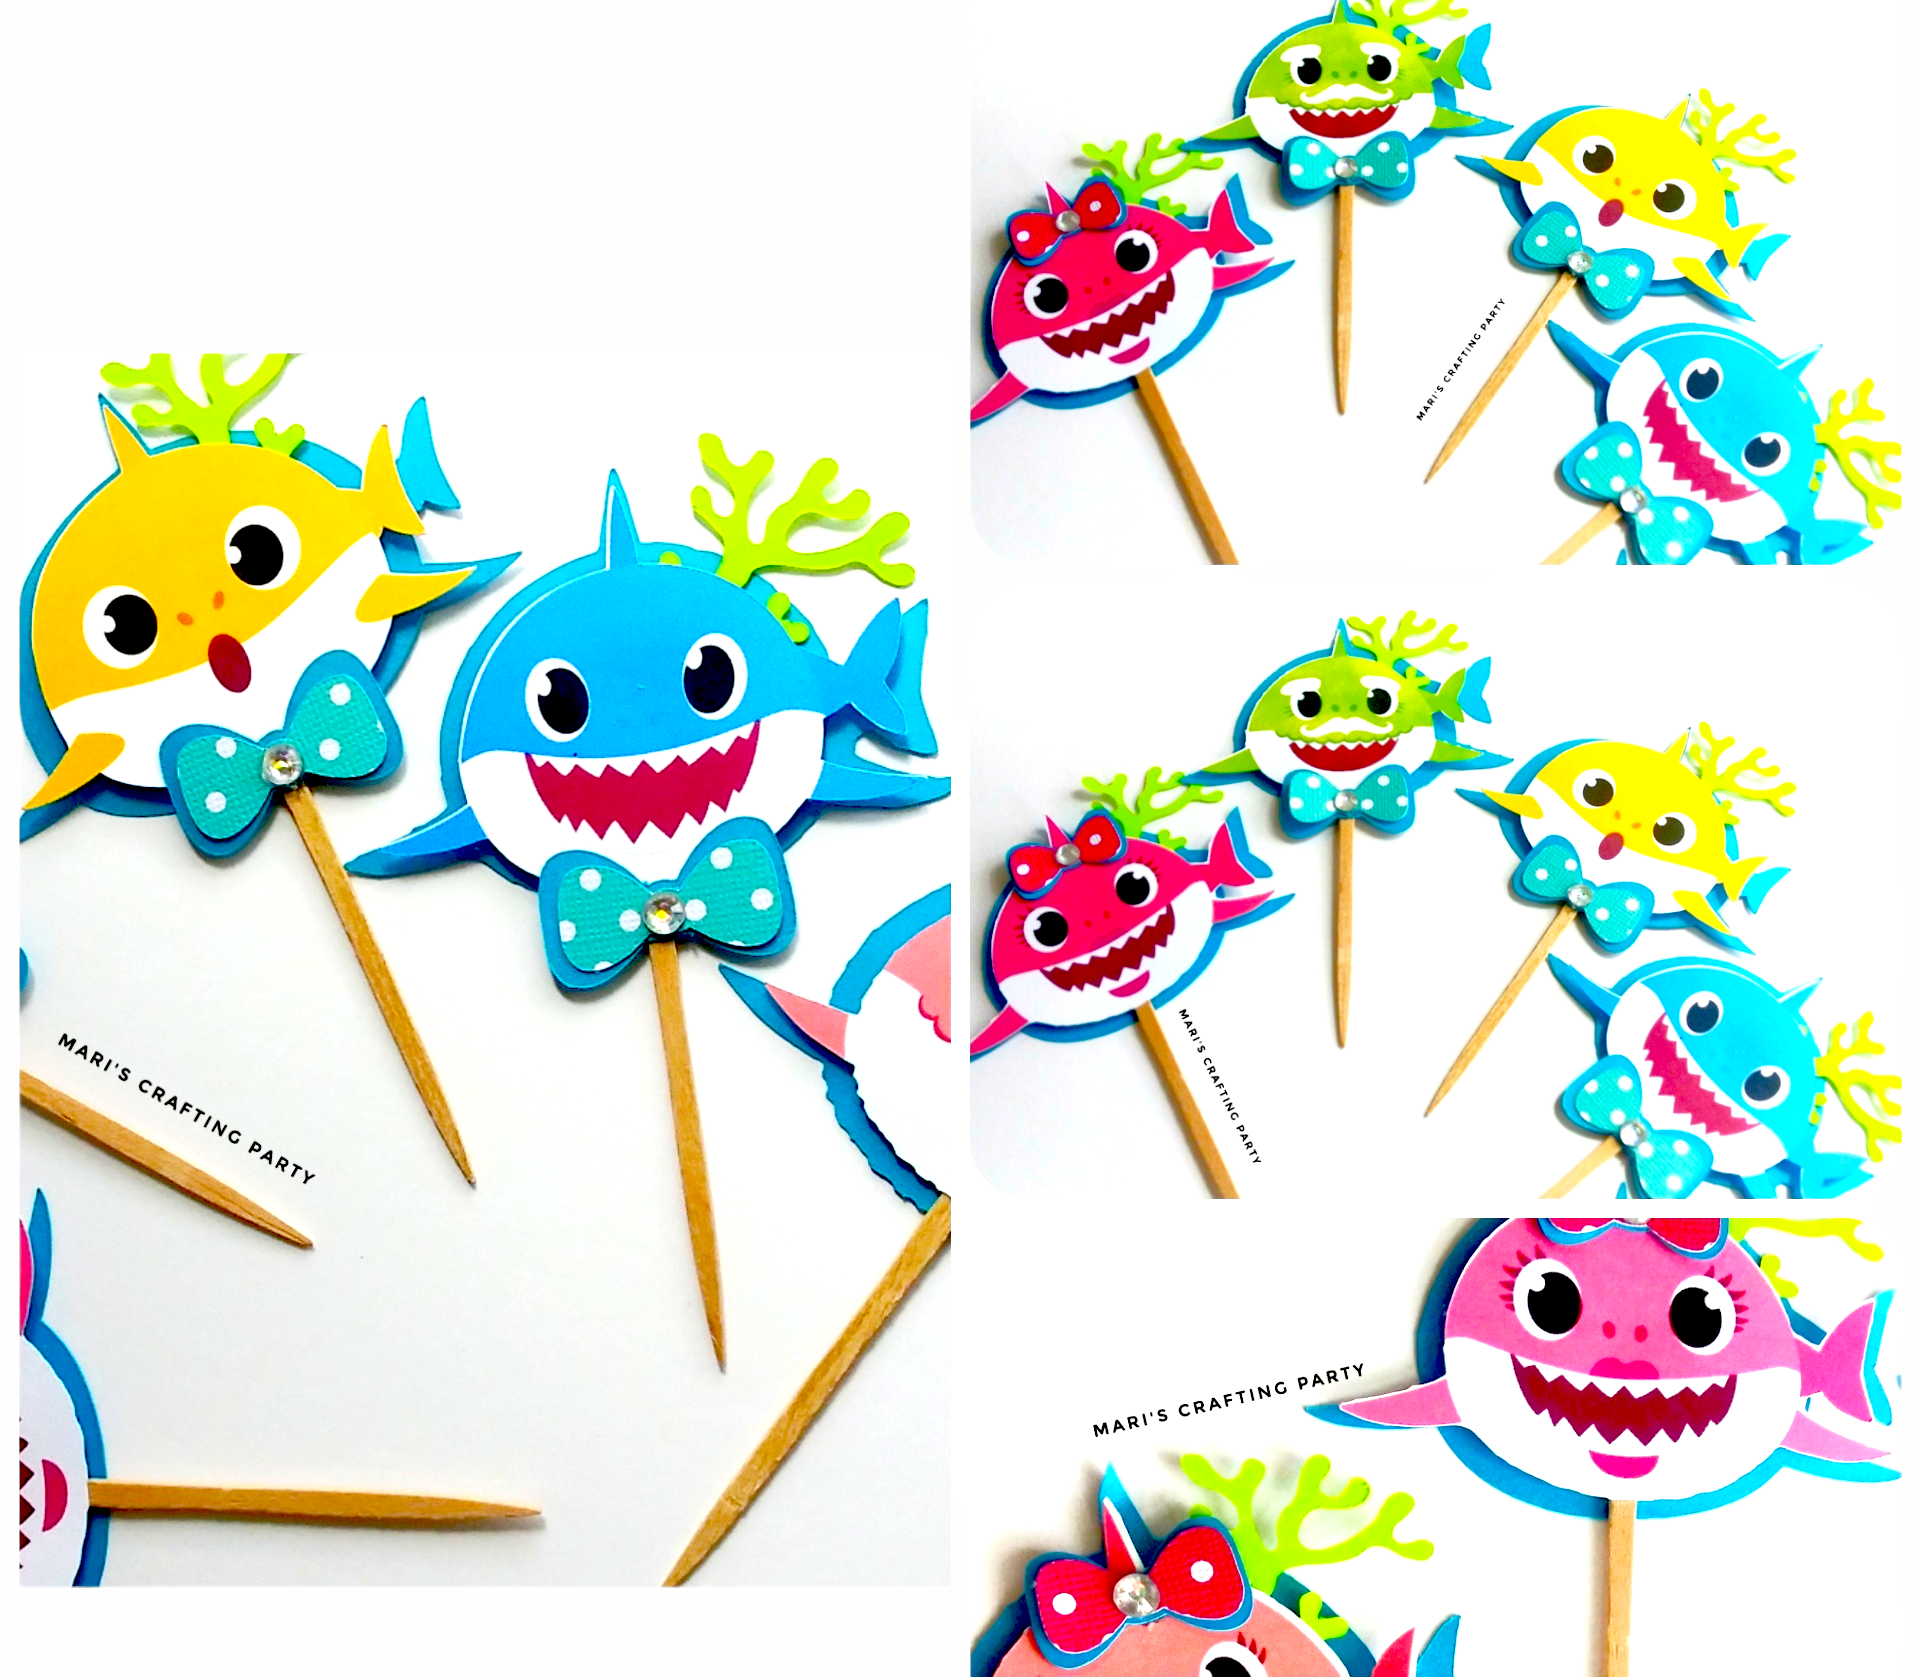 8 Pack Shark Birthday Cake Toppers - Little Shark Cake Decorations for Kids  Shark Theme Birthday Party Baby Shower : Amazon.ae: Toys